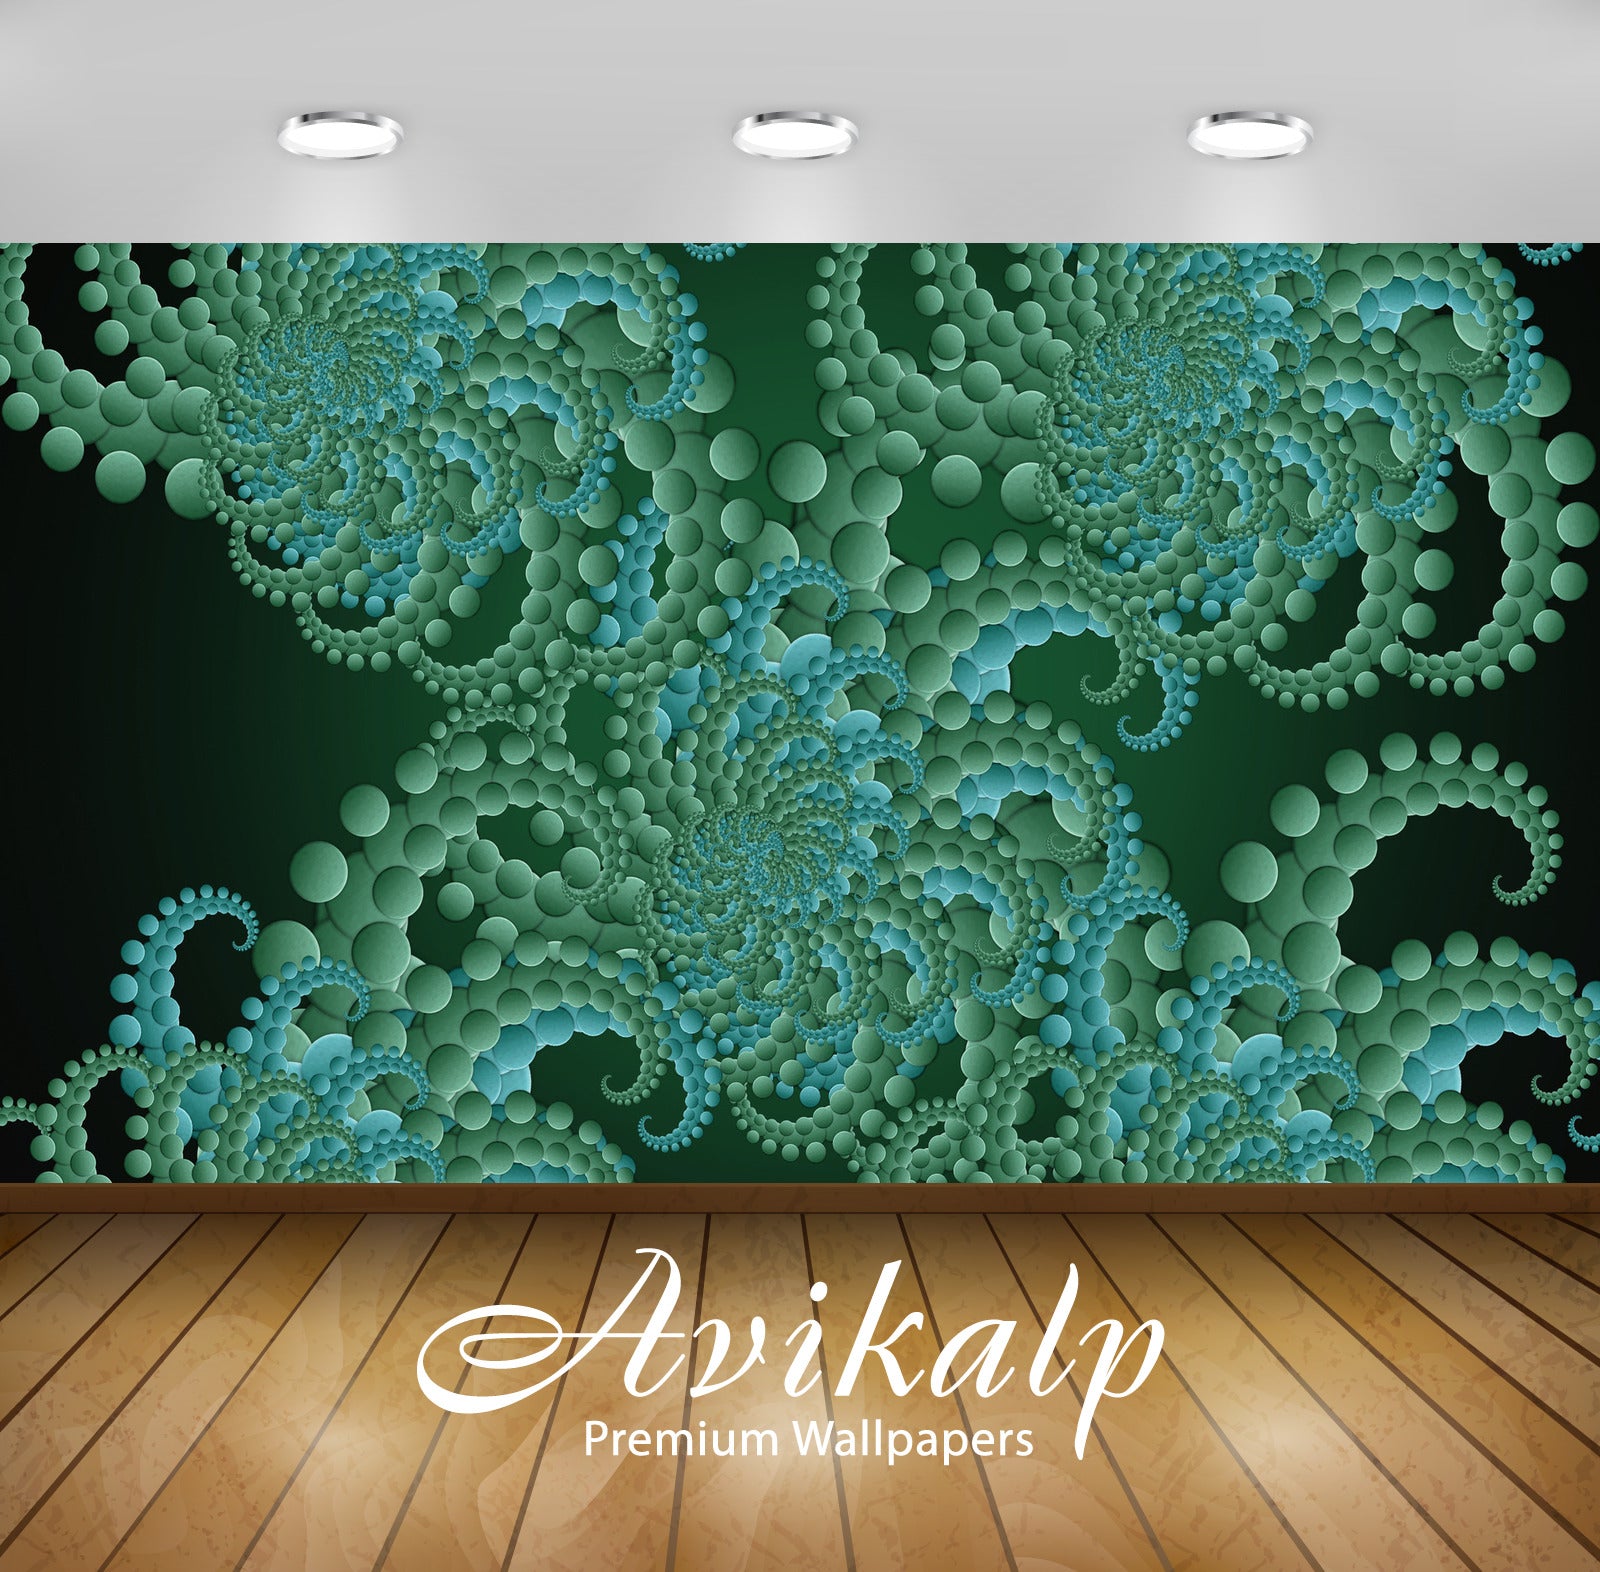 Avikalp Exclusive Awi4352 Fractal Circles Full HD Wallpapers for Living room, Hall, Kids Room, Kitch